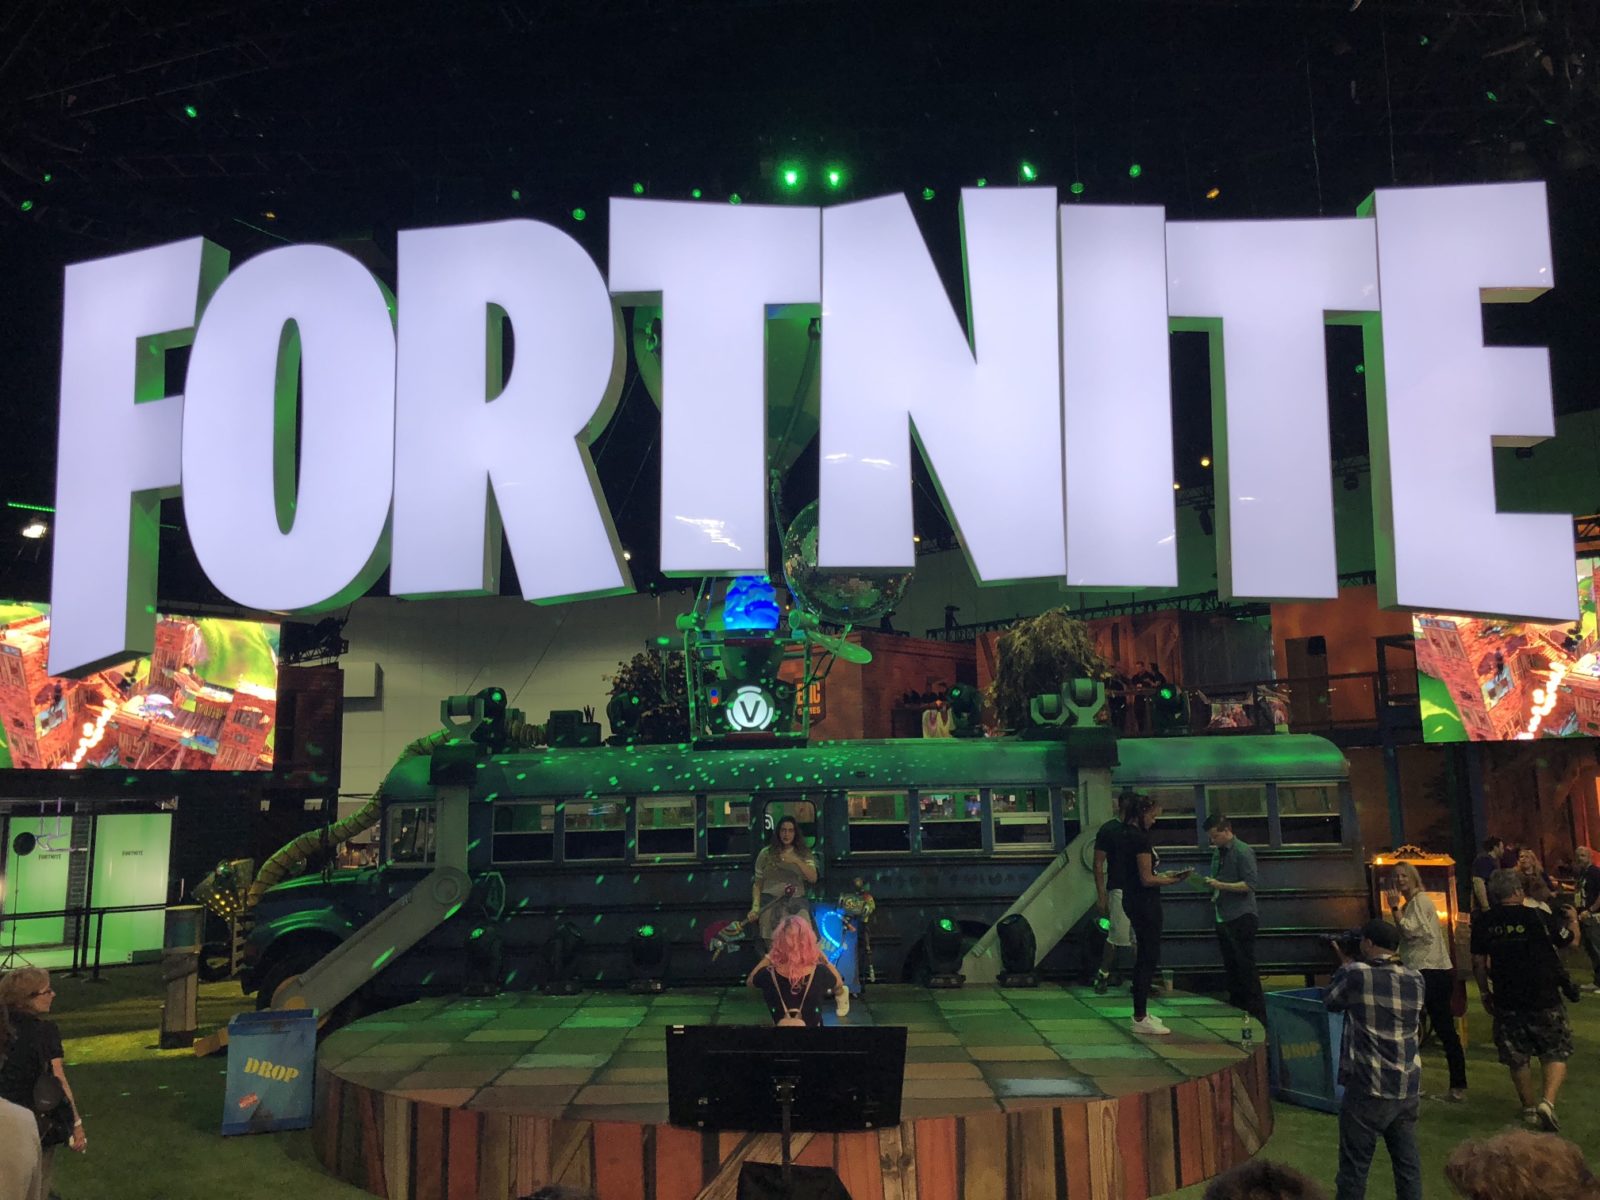 Epic Games at E3 2018 Recap: How to Transform a Classic Rental Item to a Statement Attraction